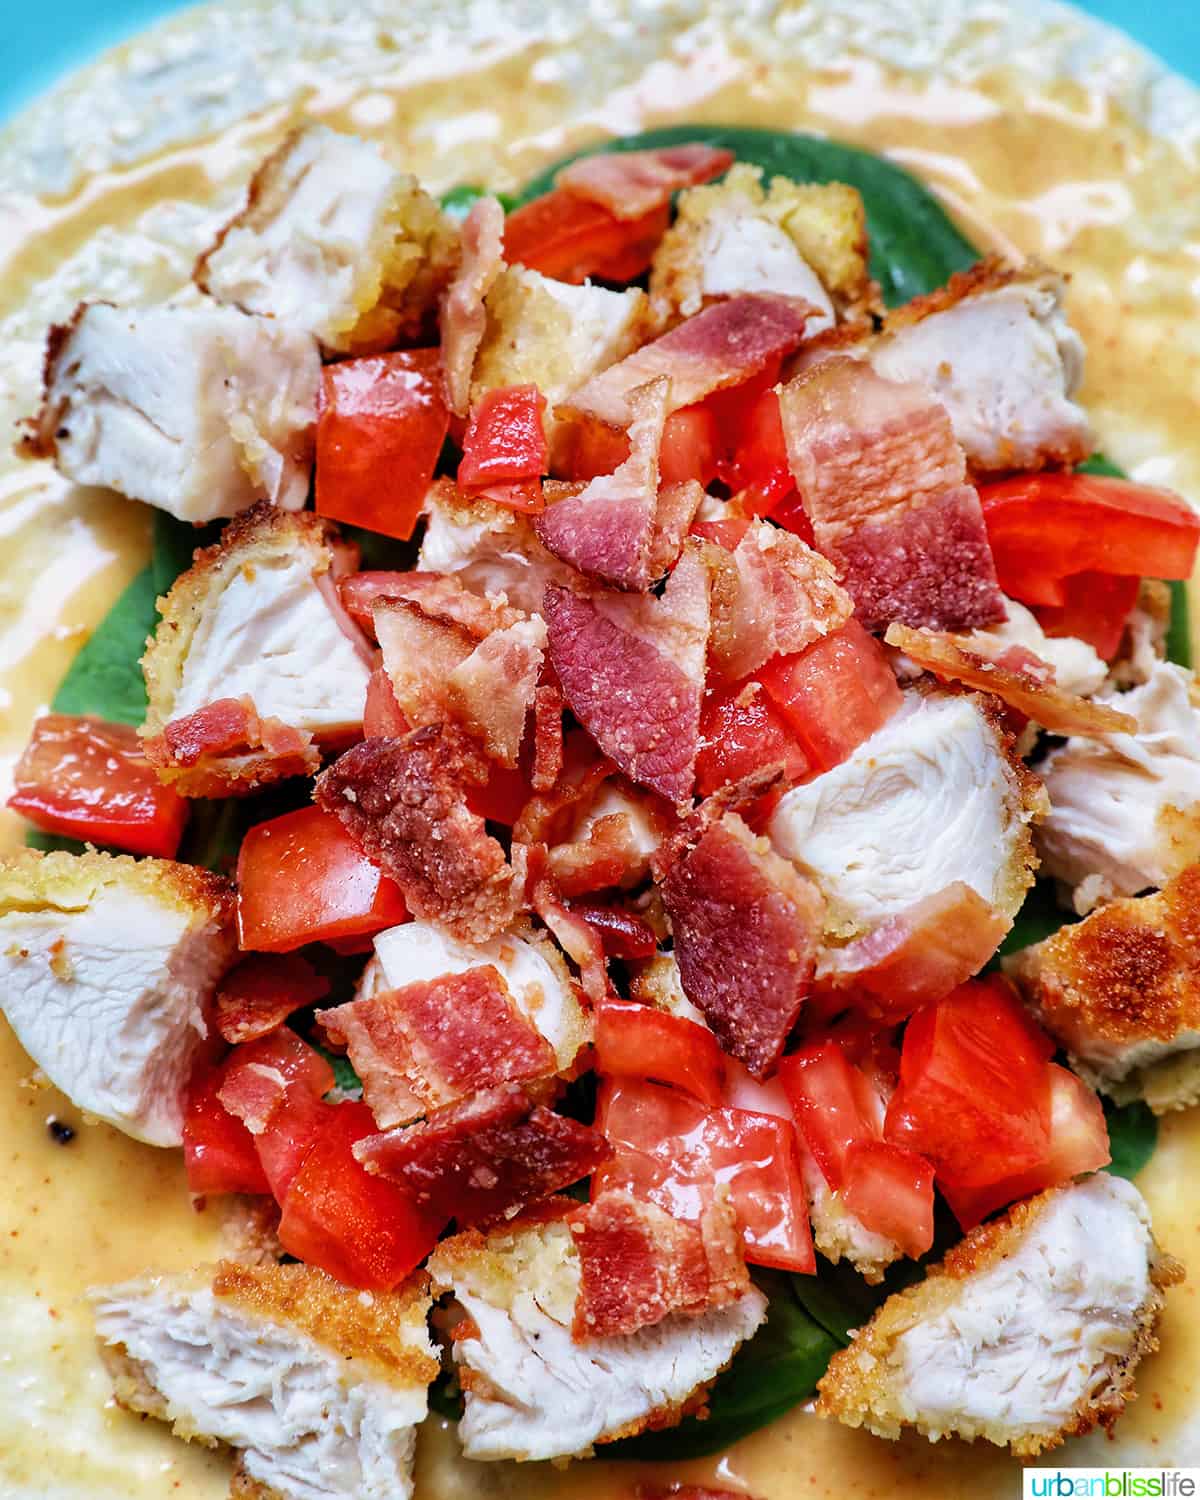 chicken, tomatoes, avocados, spinach, and bacon on a tortilla wrap.